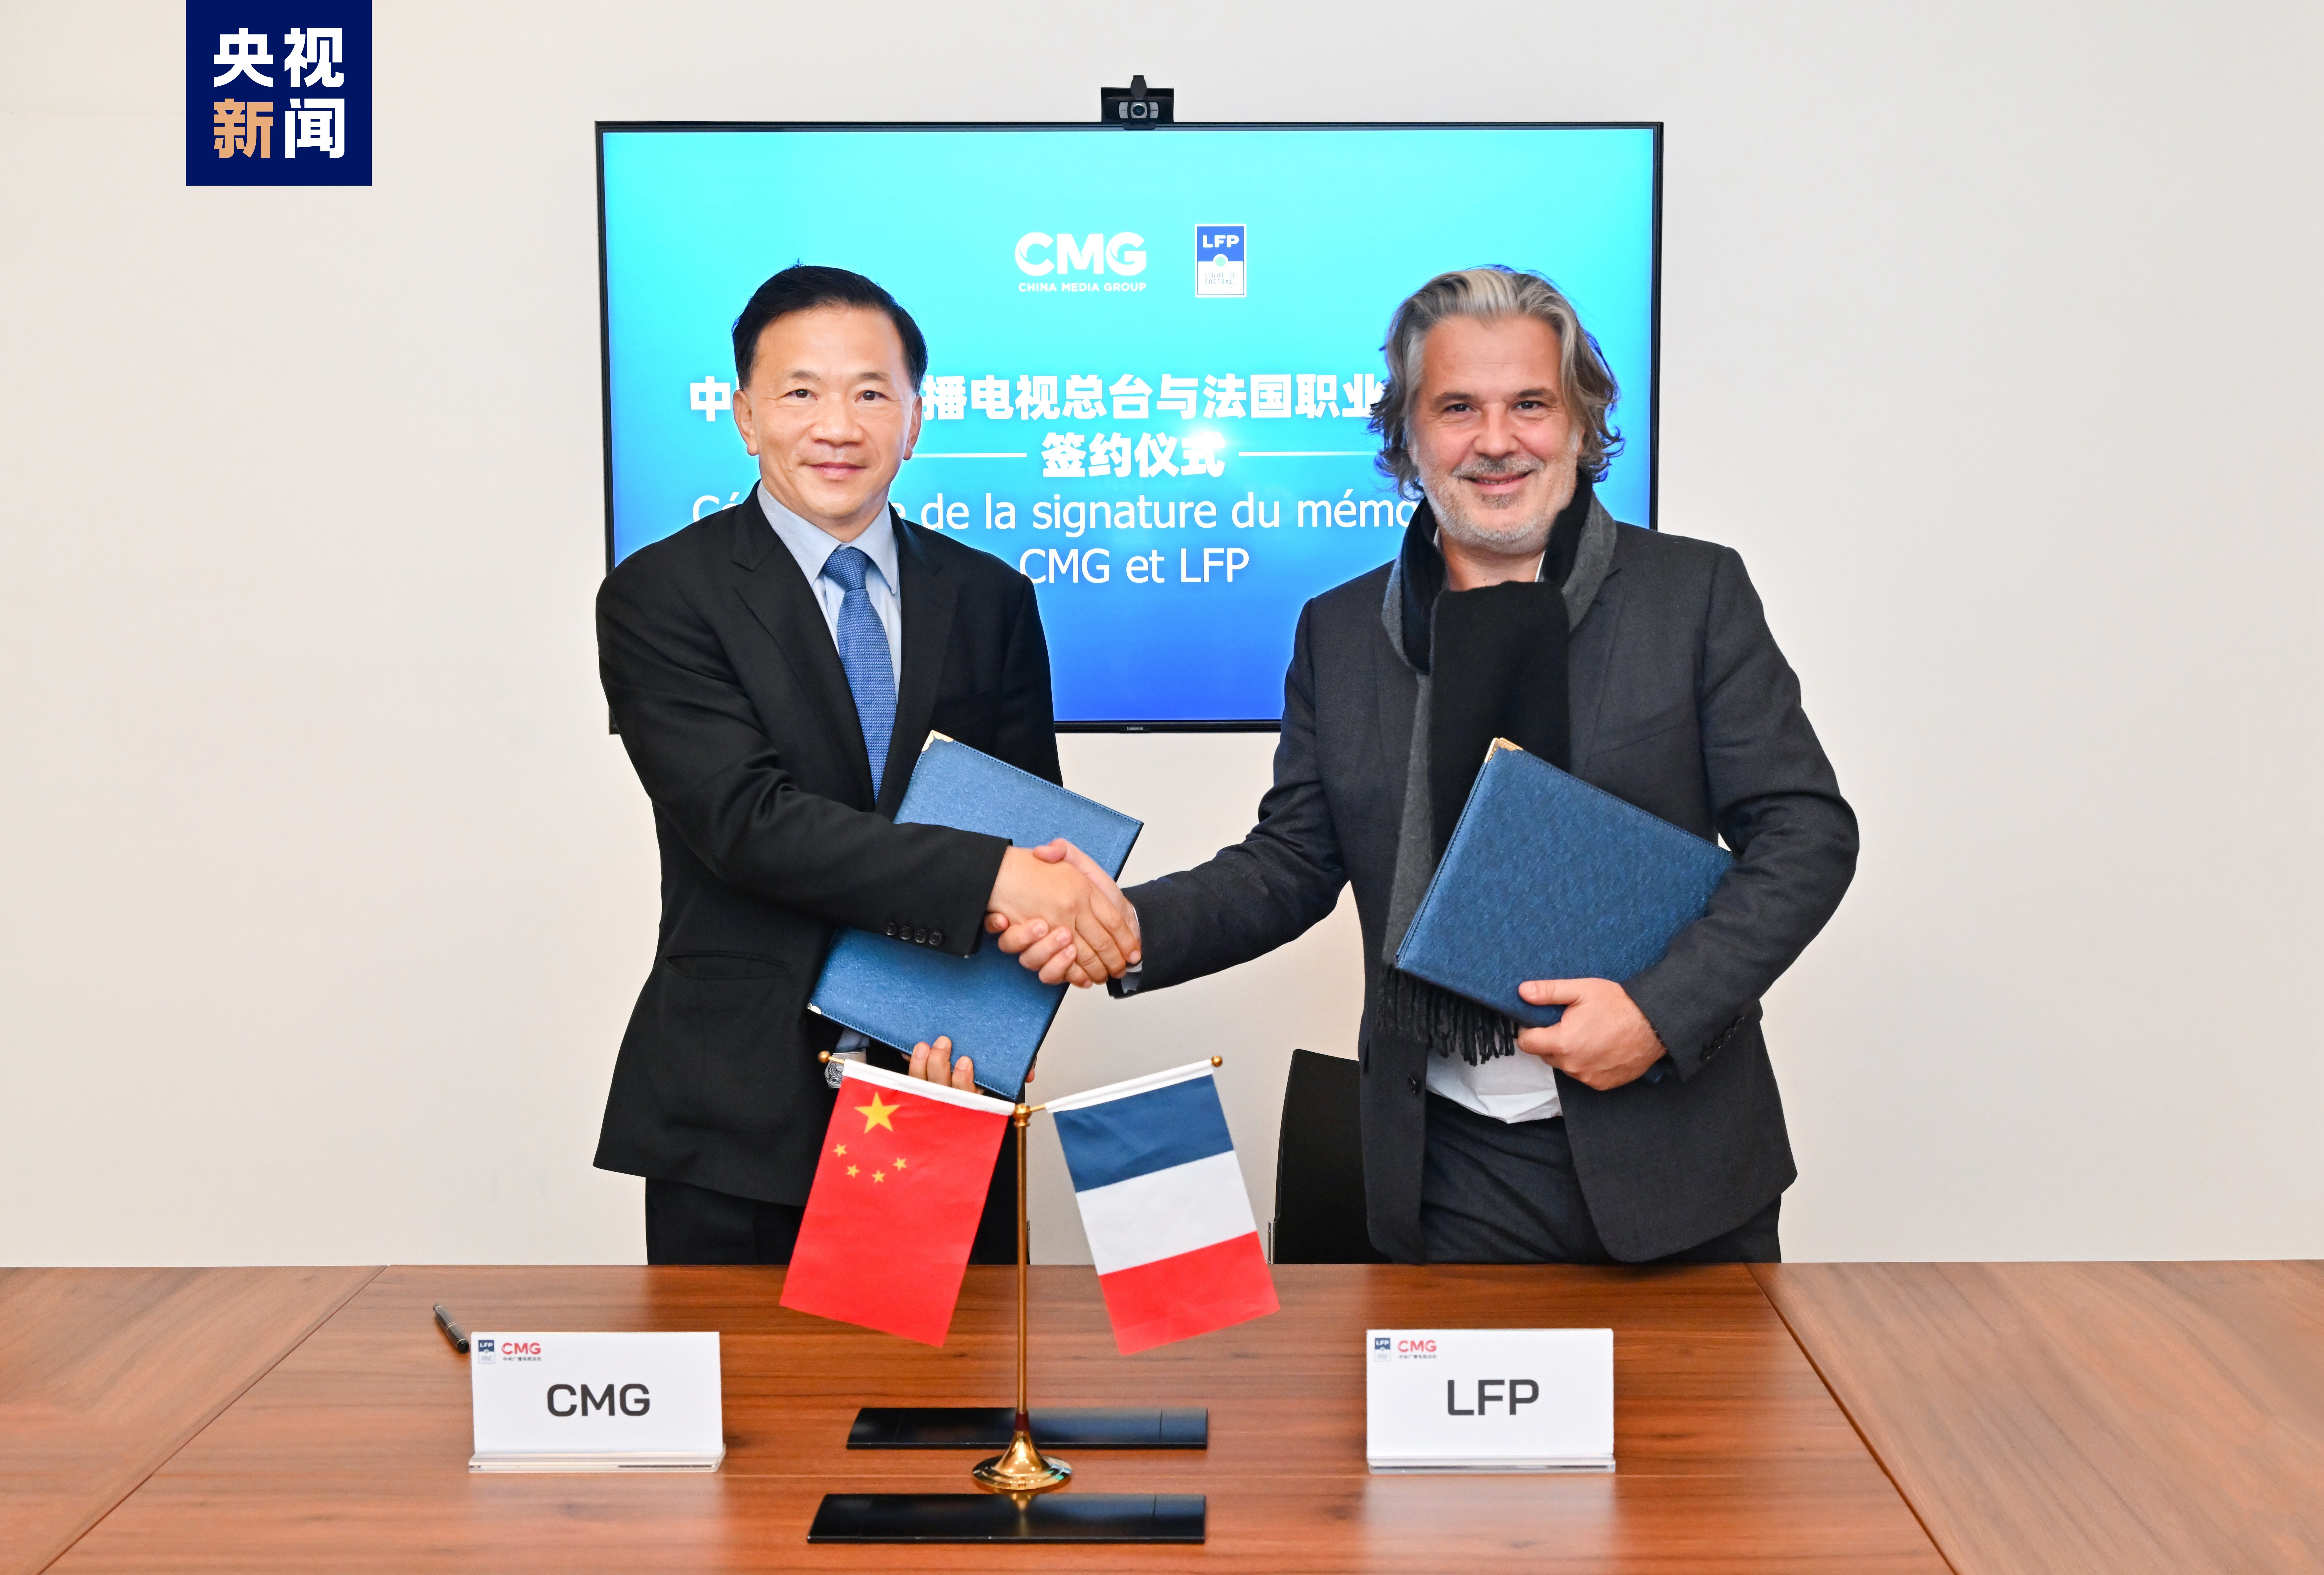 Shen Haixiong (L), president of China Media Group, and Vincent Labrune, president of France's Ligue de Football Professionnel, shake hands after signing a memorandum of cooperation, October 23, 2023. /CMG